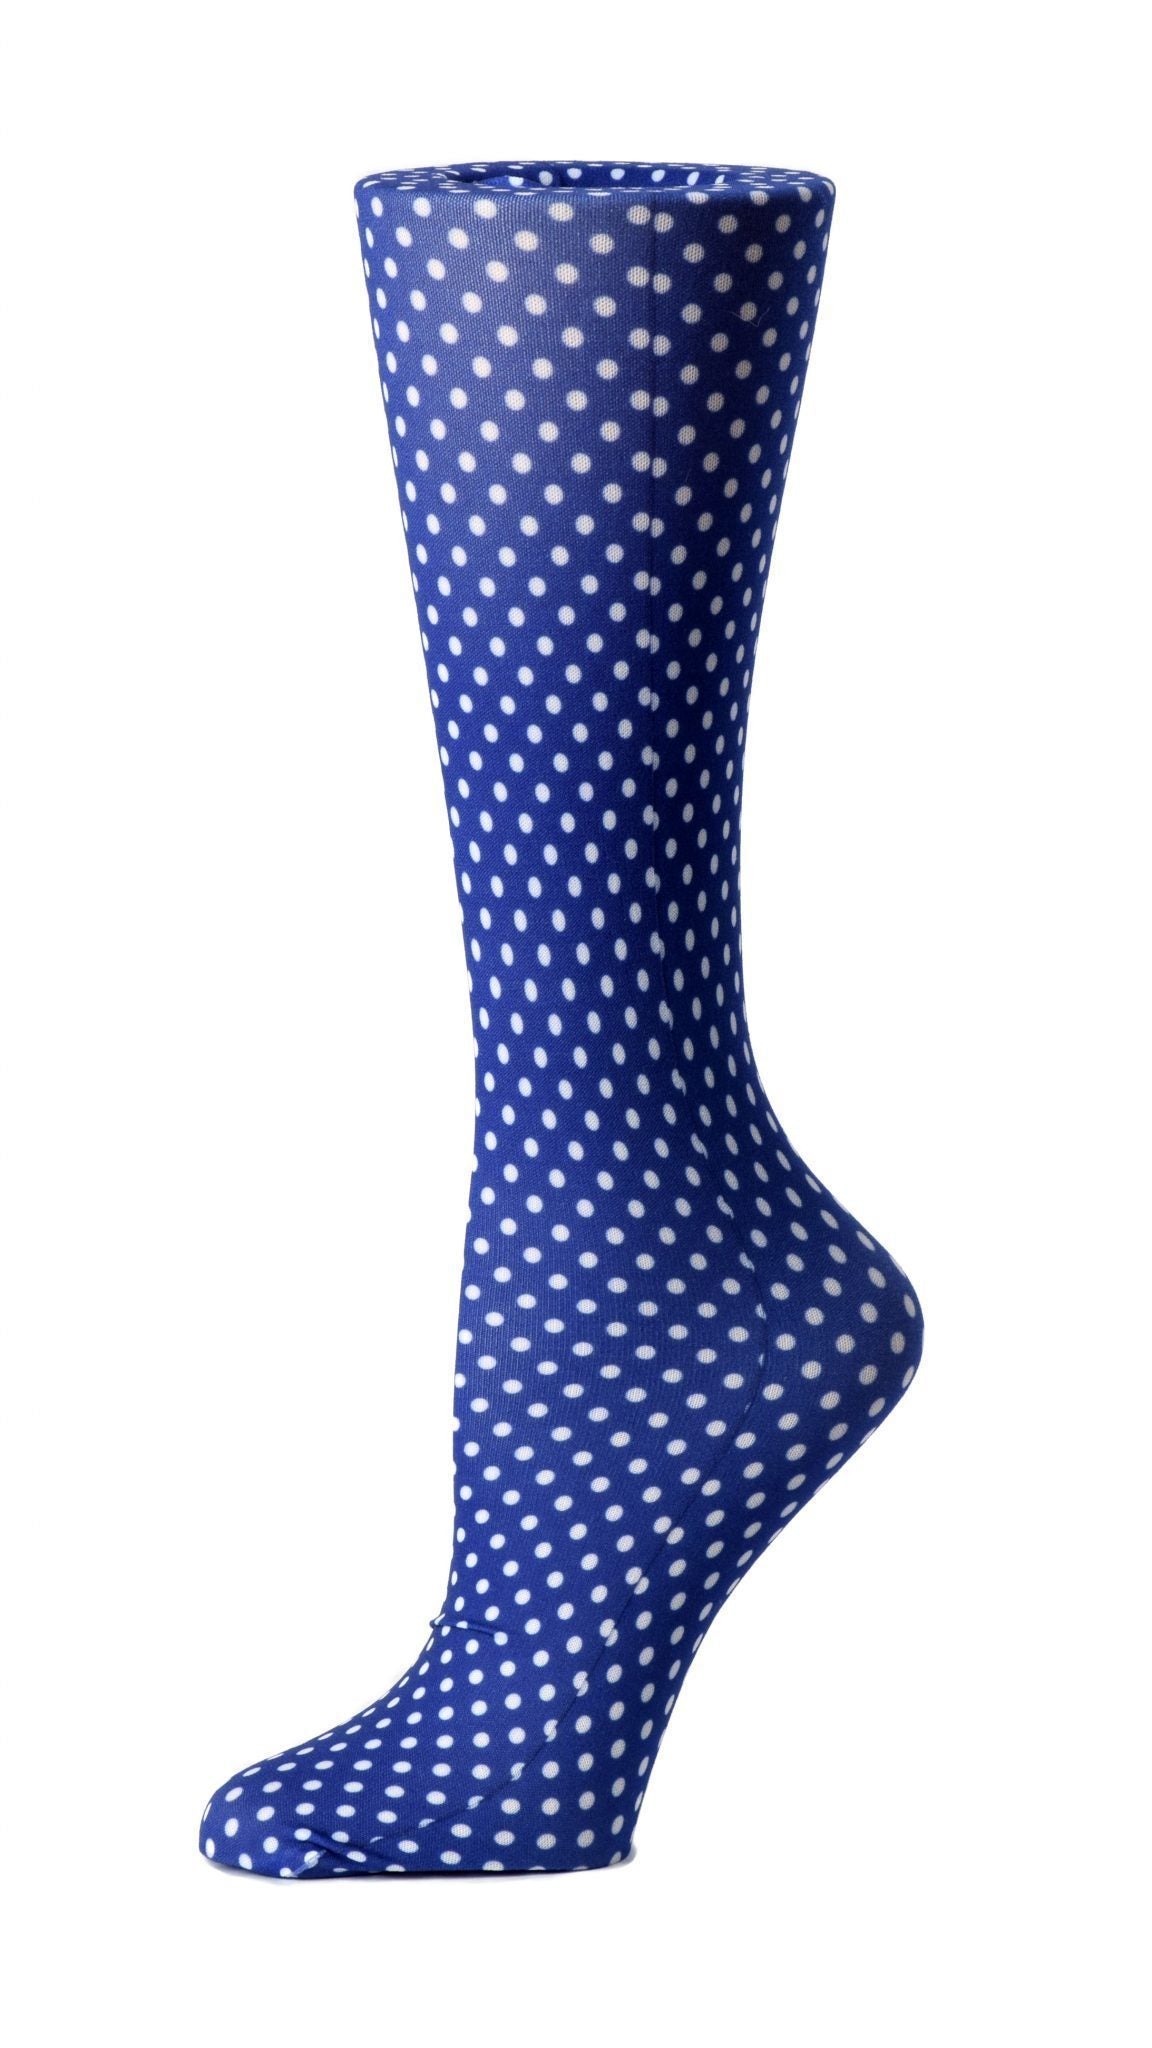 Cutieful Moderate Compression Socks 10-18 MMhg Wide Calf Knit Print Pattern Blue Polka Dot at Parker's Clothing and Shoes.